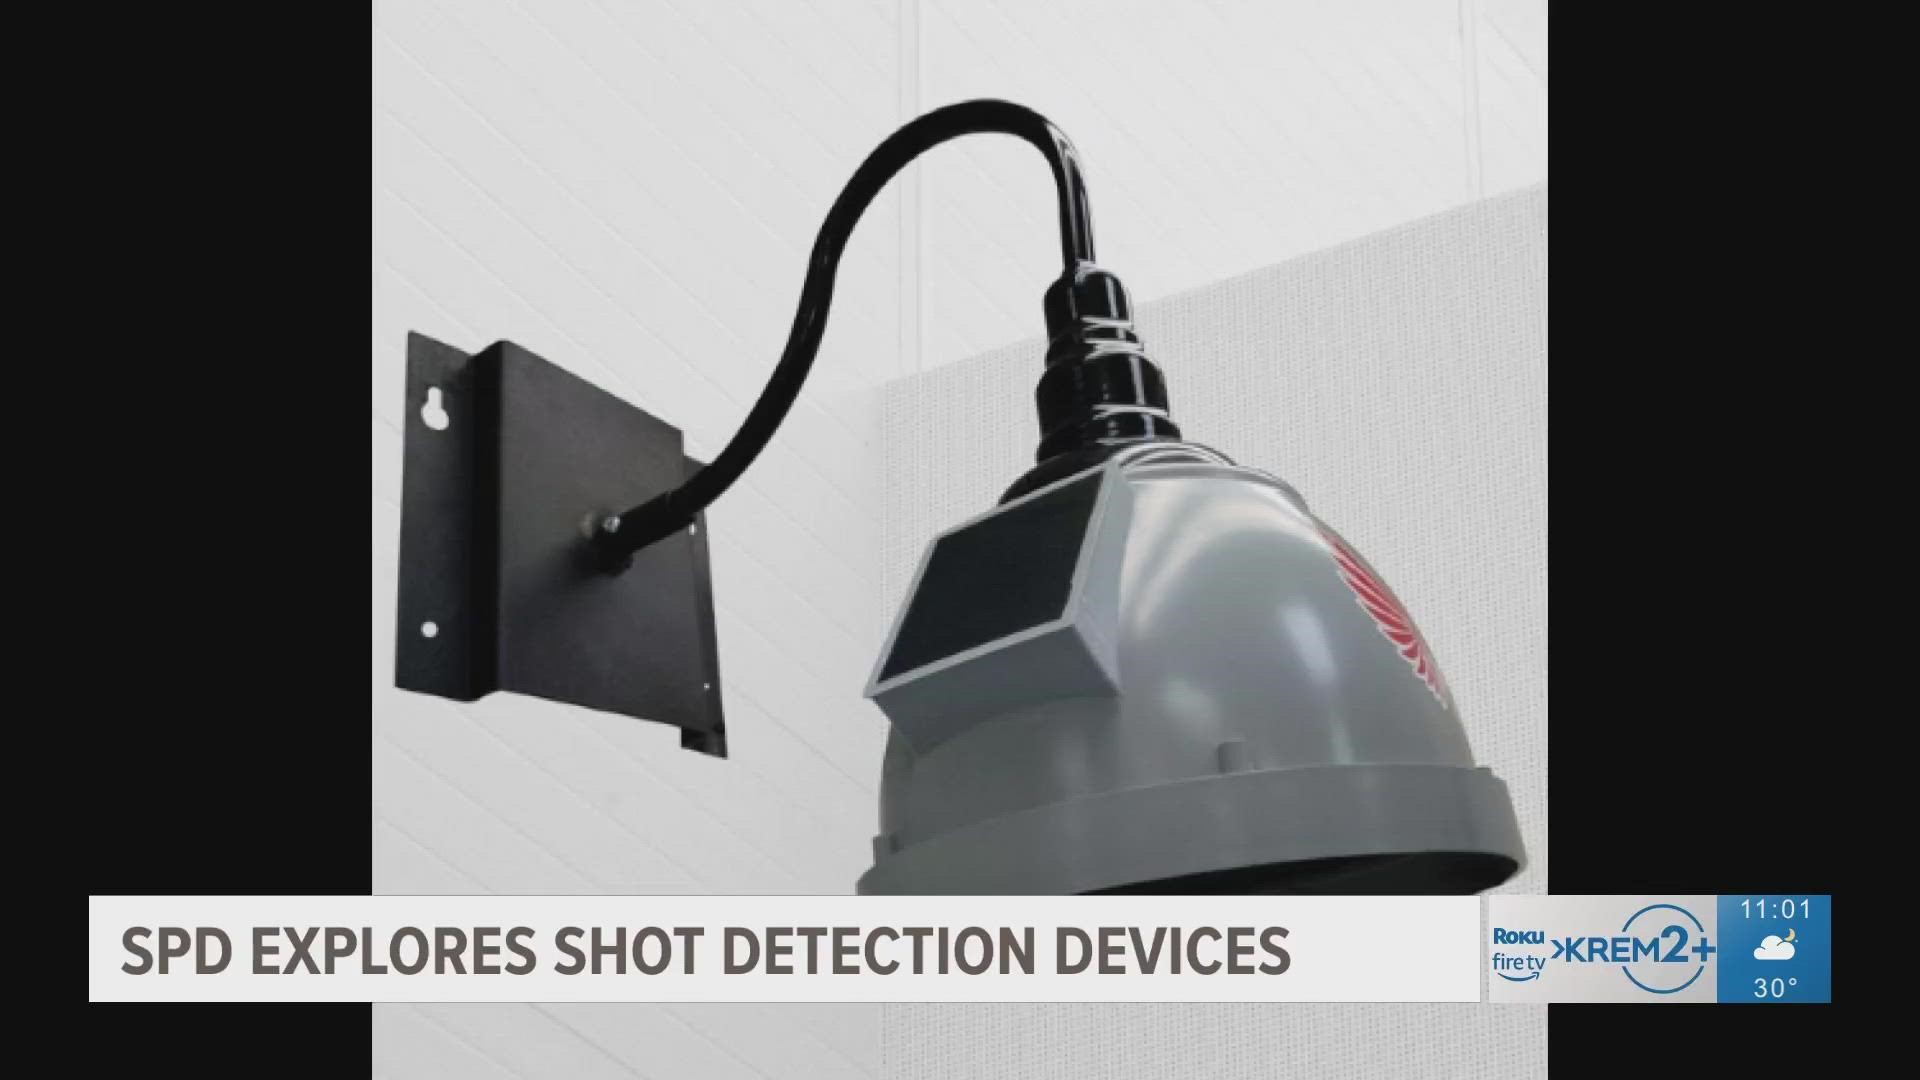 The detectors can show police where shots are coming from within a matter of seconds.